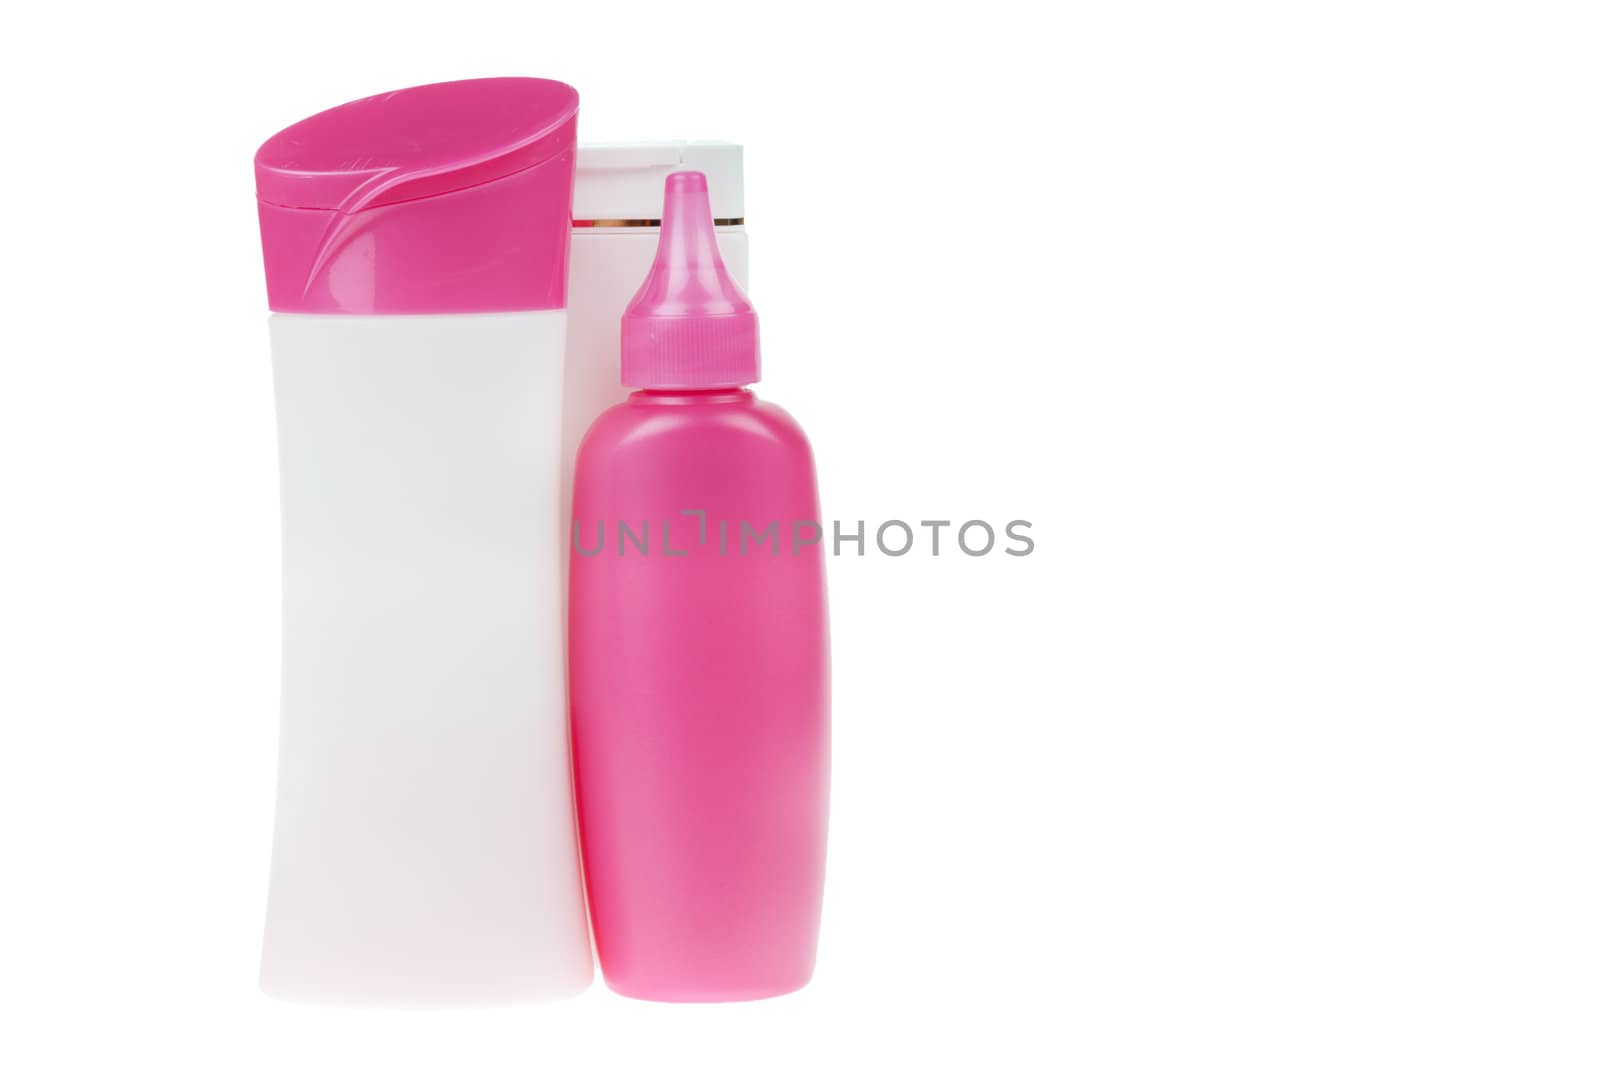 group of product packaging. isolated over white background